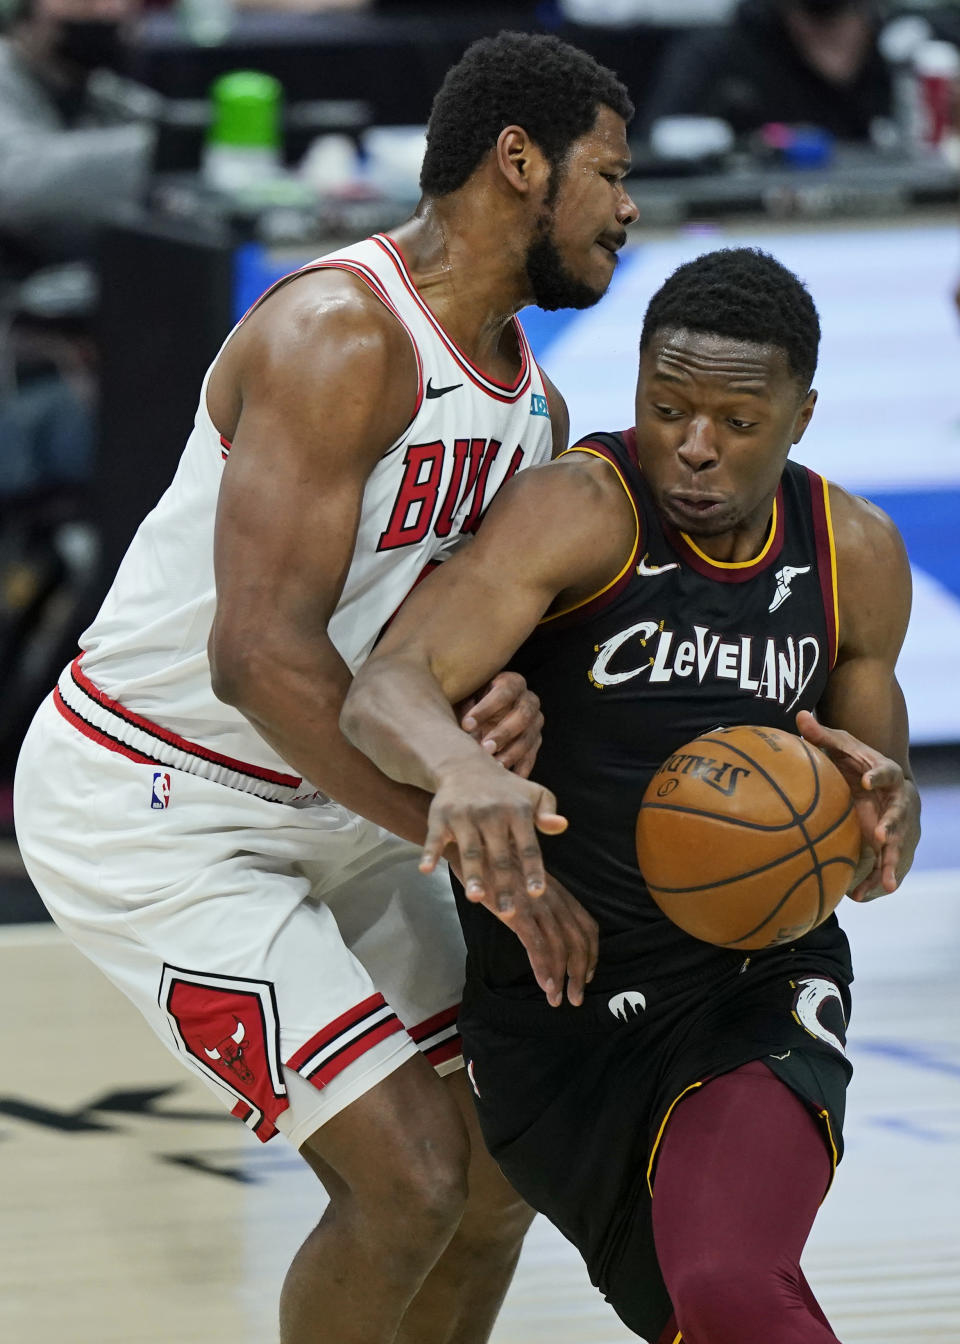 Cleveland Cavaliers' Mfiondu Kabengele, right, drives past Chicago Bulls' Cristiano Felicio during the second half of an NBA basketball game, Wednesday, April 21, 2021, in Cleveland. (AP Photo/Tony Dejak)